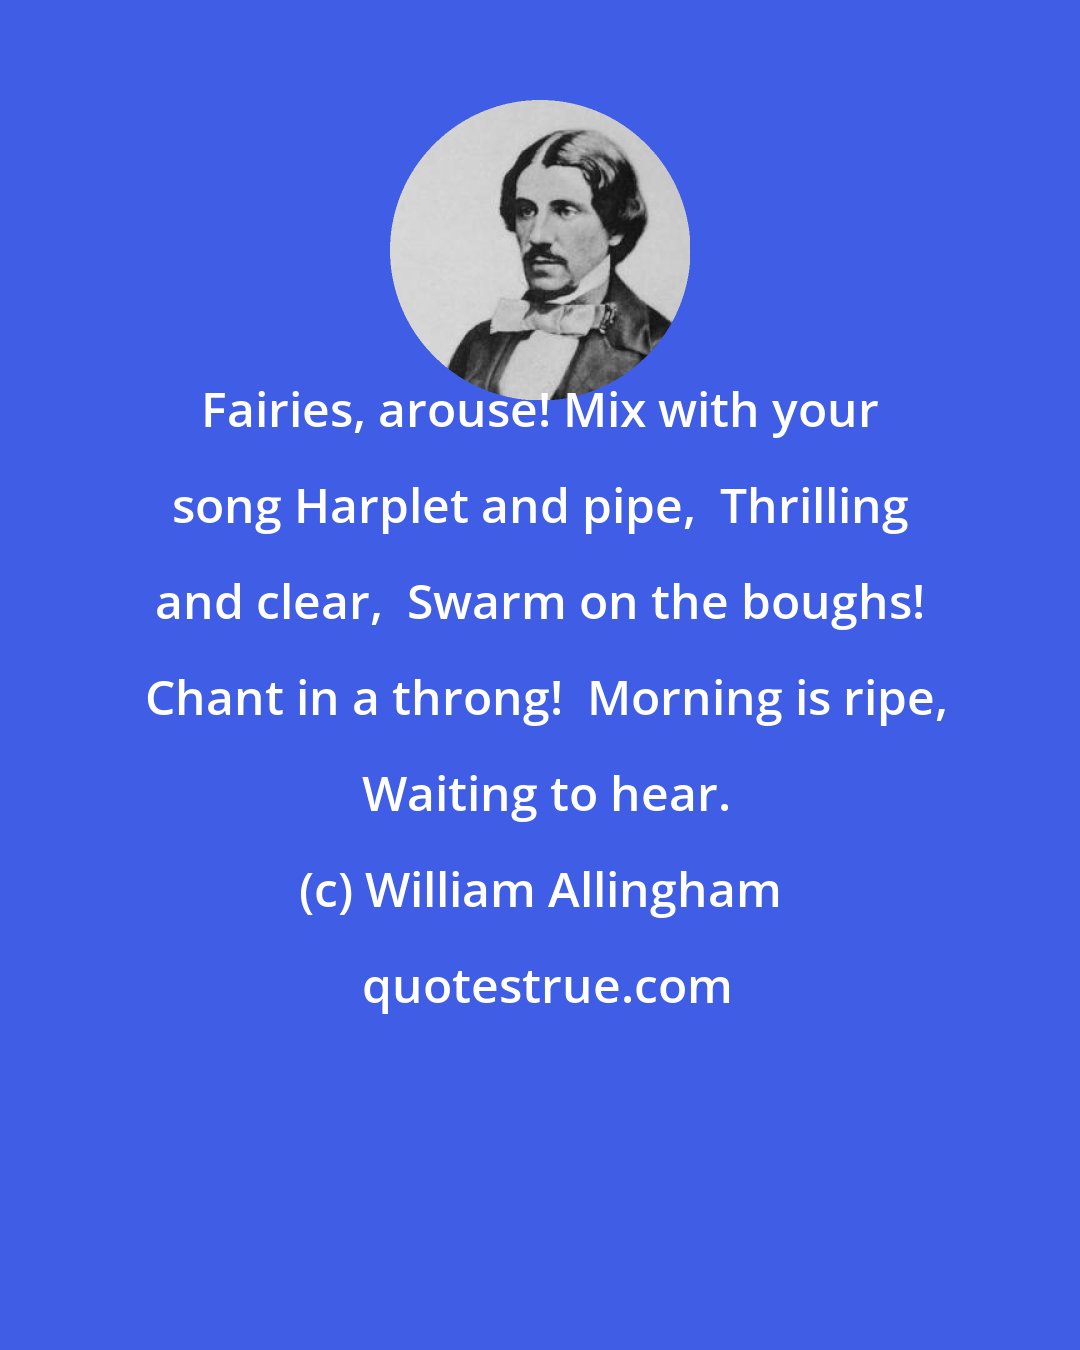 William Allingham: Fairies, arouse! Mix with your song Harplet and pipe,  Thrilling and clear,  Swarm on the boughs!  Chant in a throng!  Morning is ripe,  Waiting to hear.